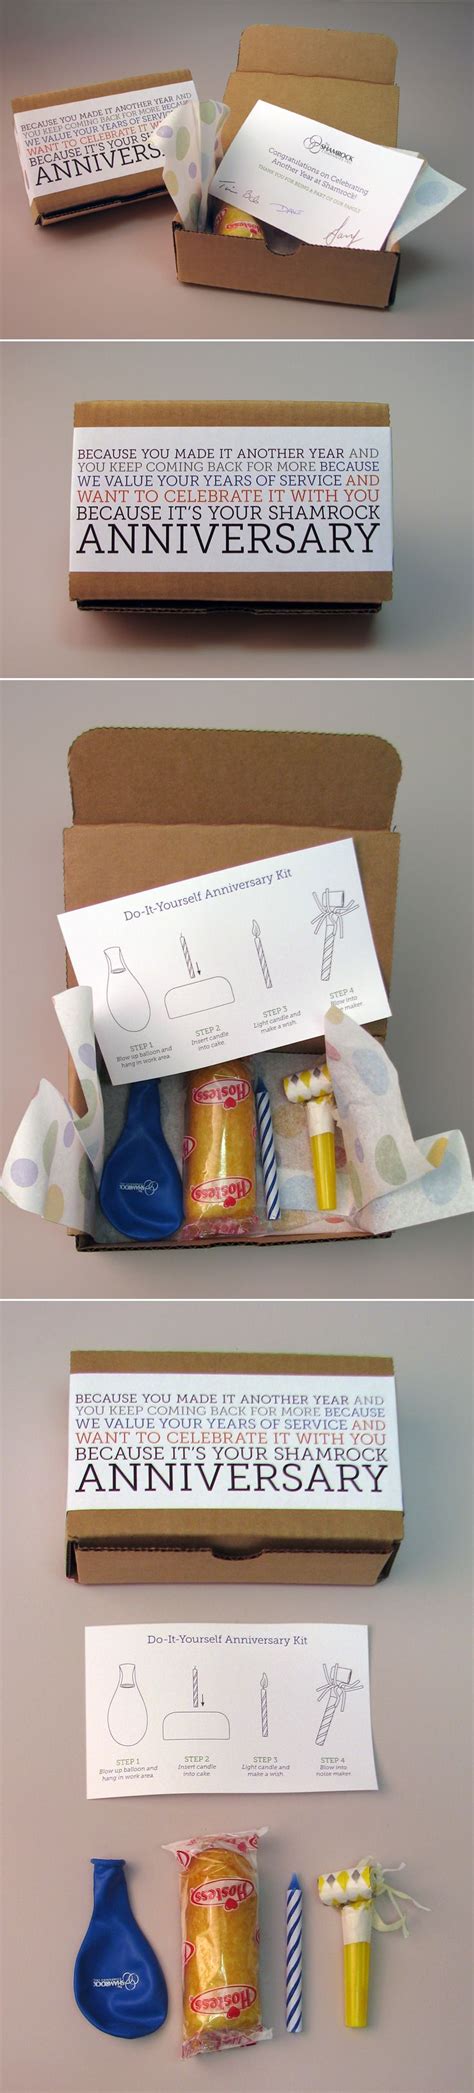 Best New Employee Welcome Kit Images On Pinterest Corporate Gifts